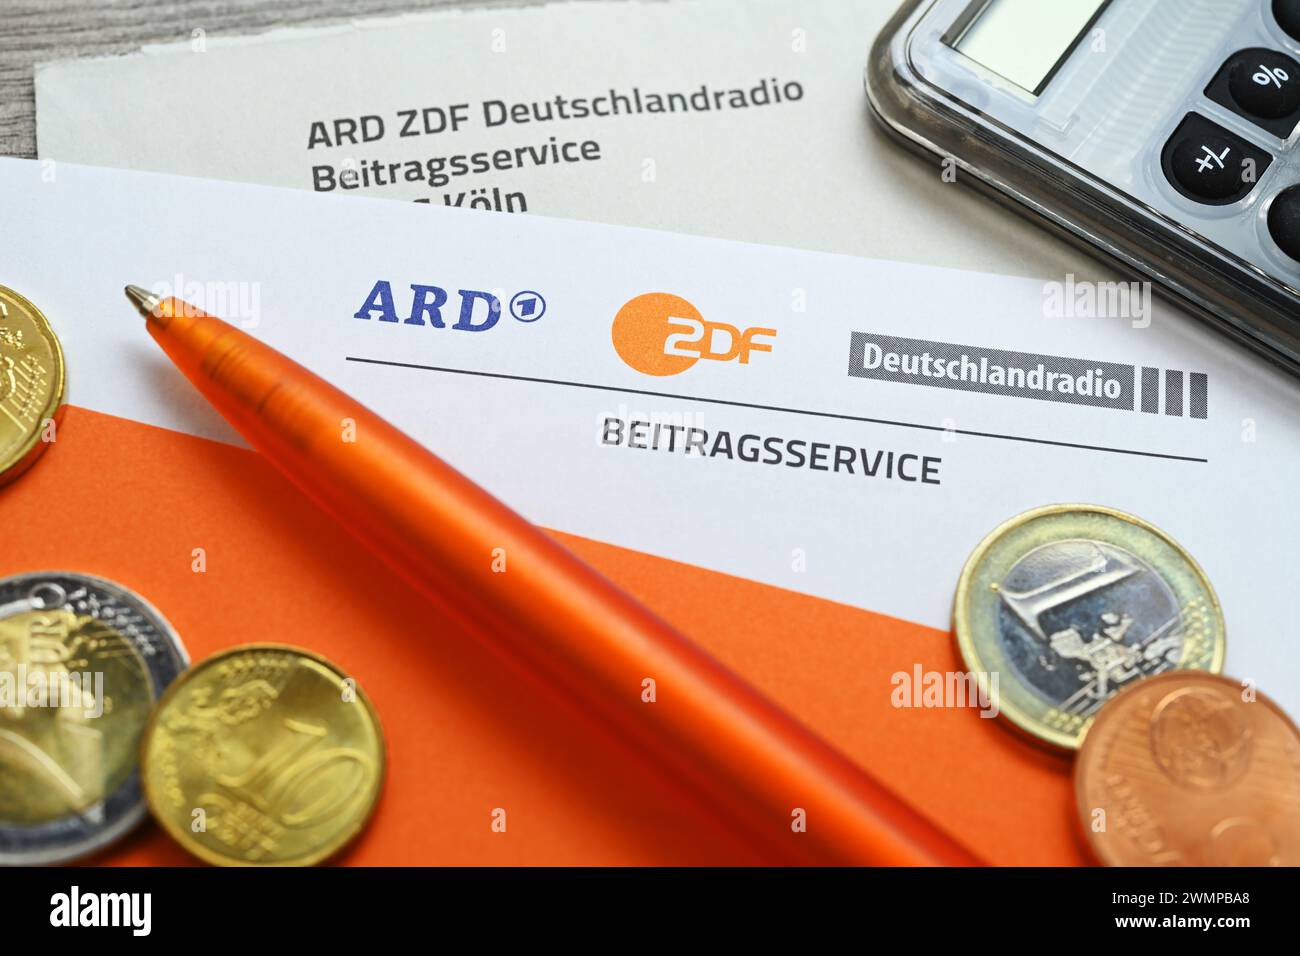 Letter From ARD ZDF Deutschlandradio Beitragsservice With Calculator And Coins, Symbolic Photo Increase In The Broadcasting Fee Stock Photo